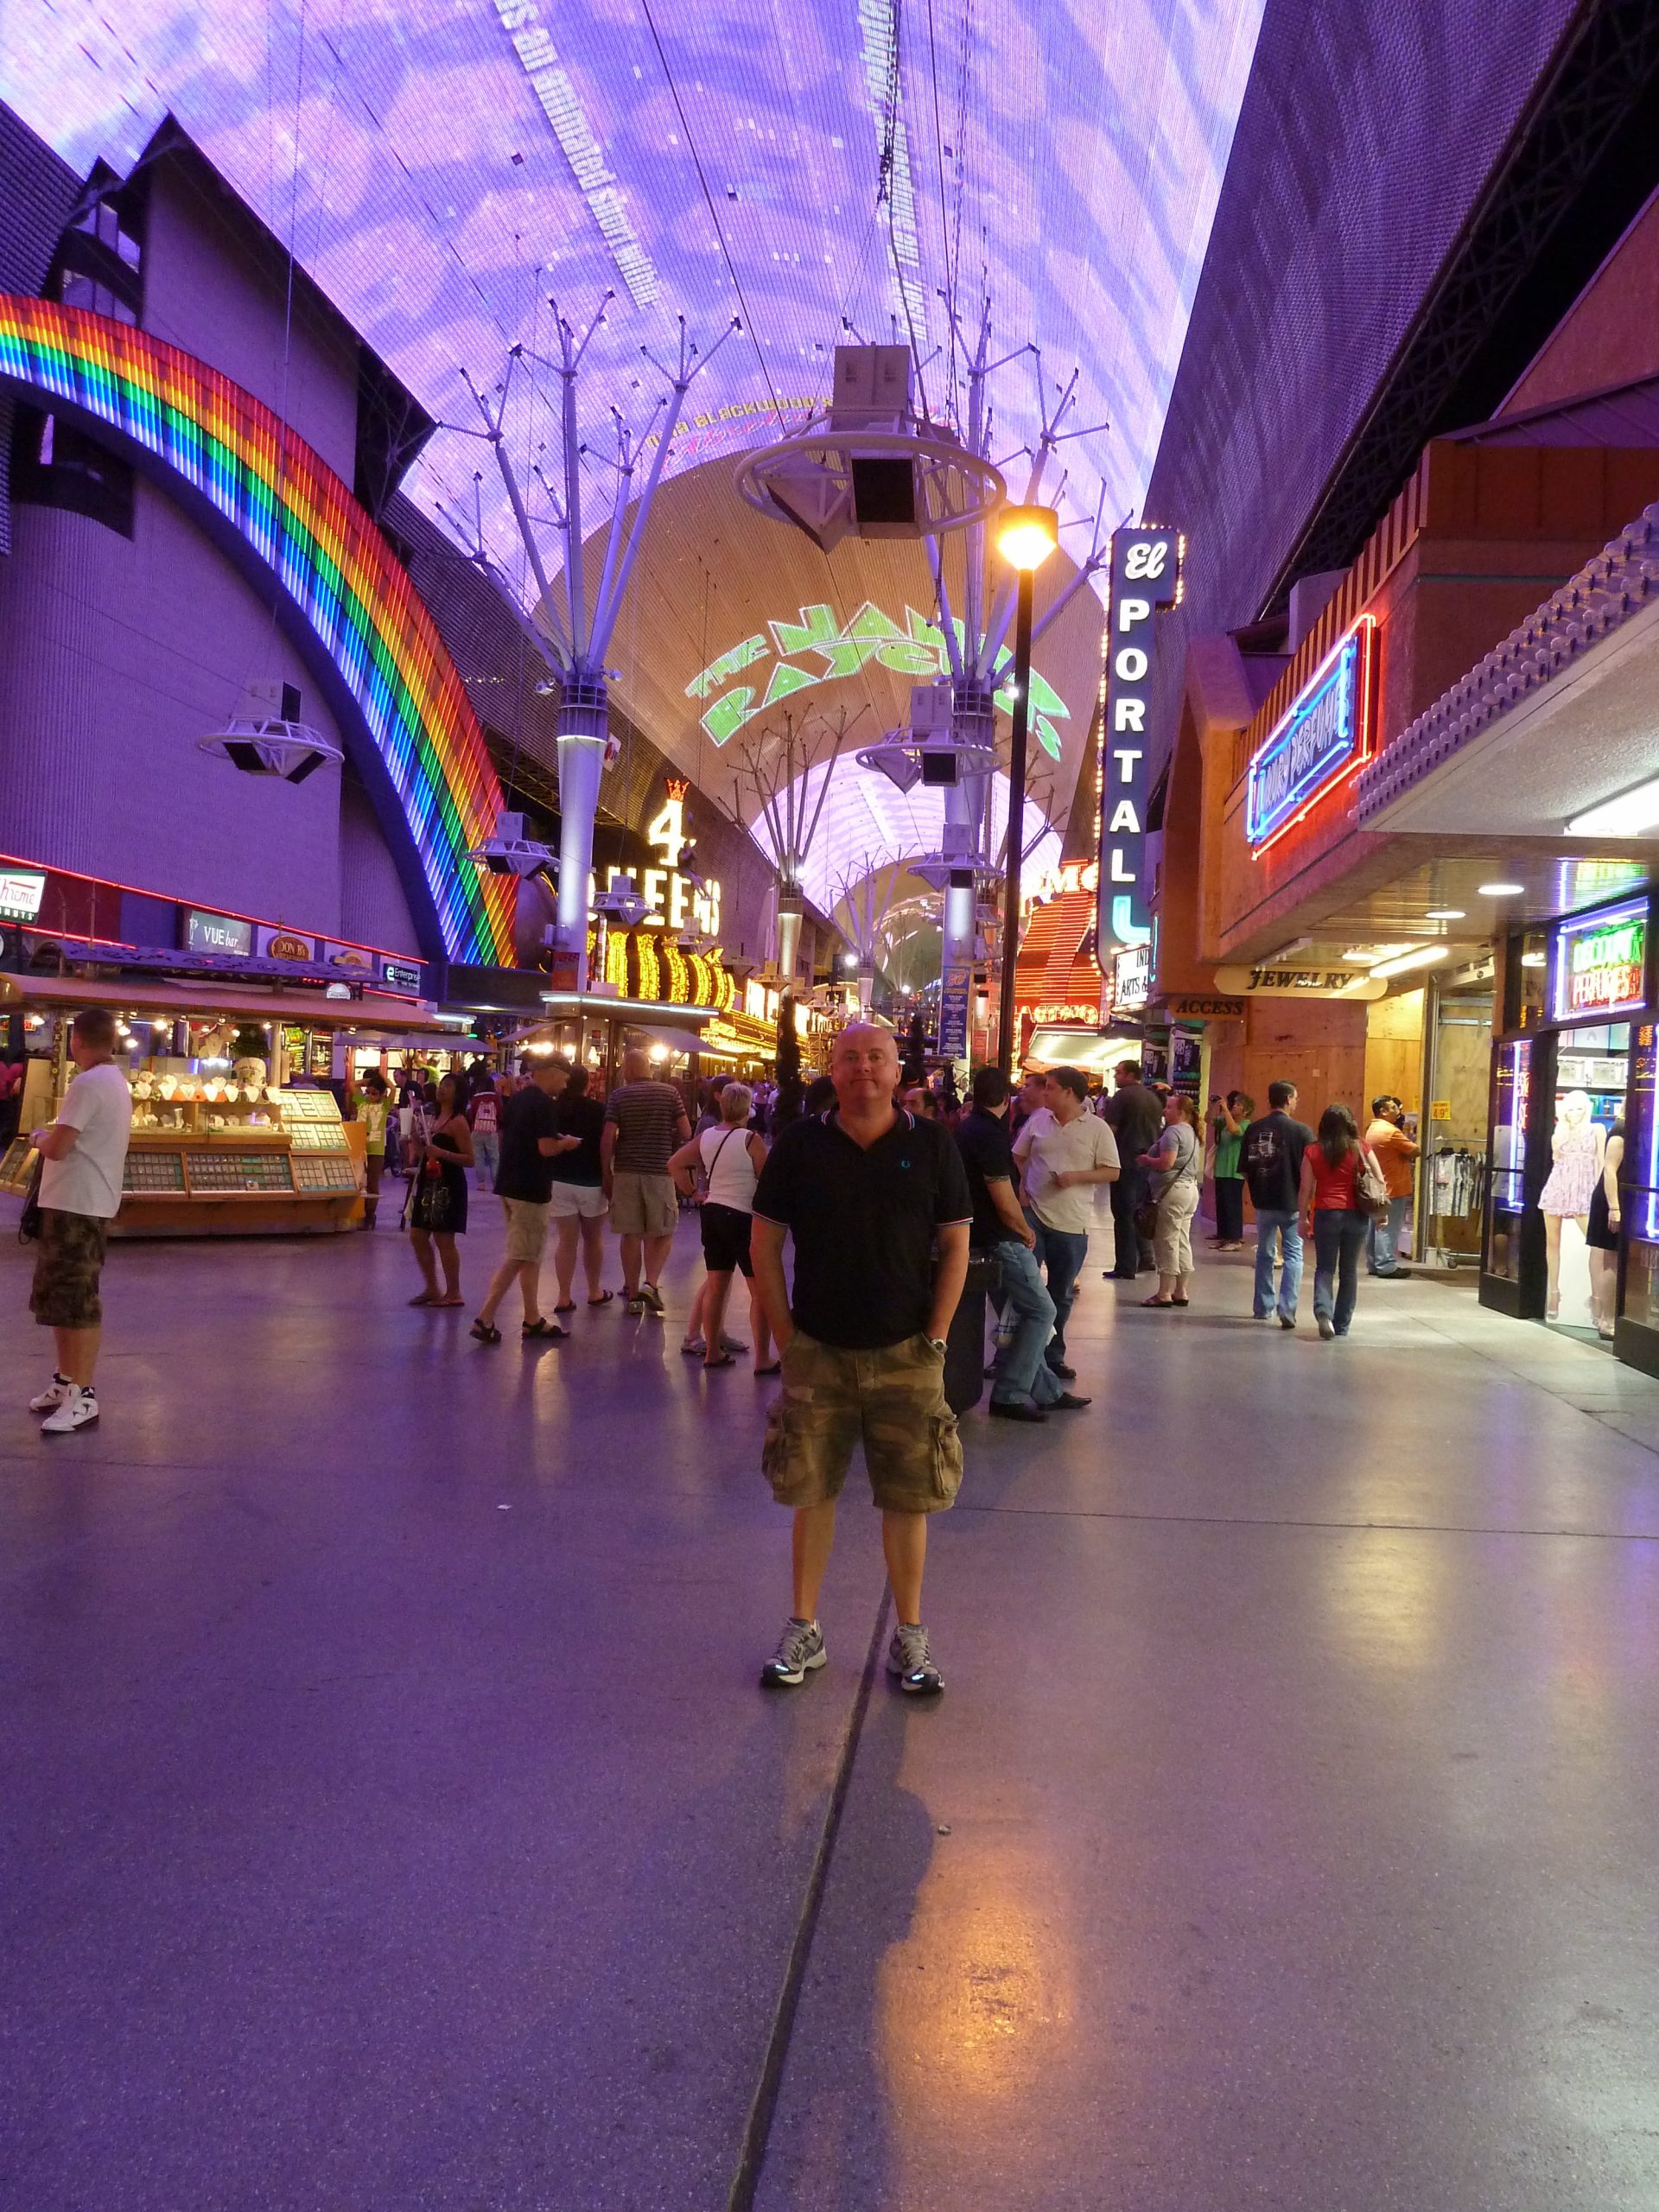 A man in shorts standing in a brightly lit shopping parade in the evening